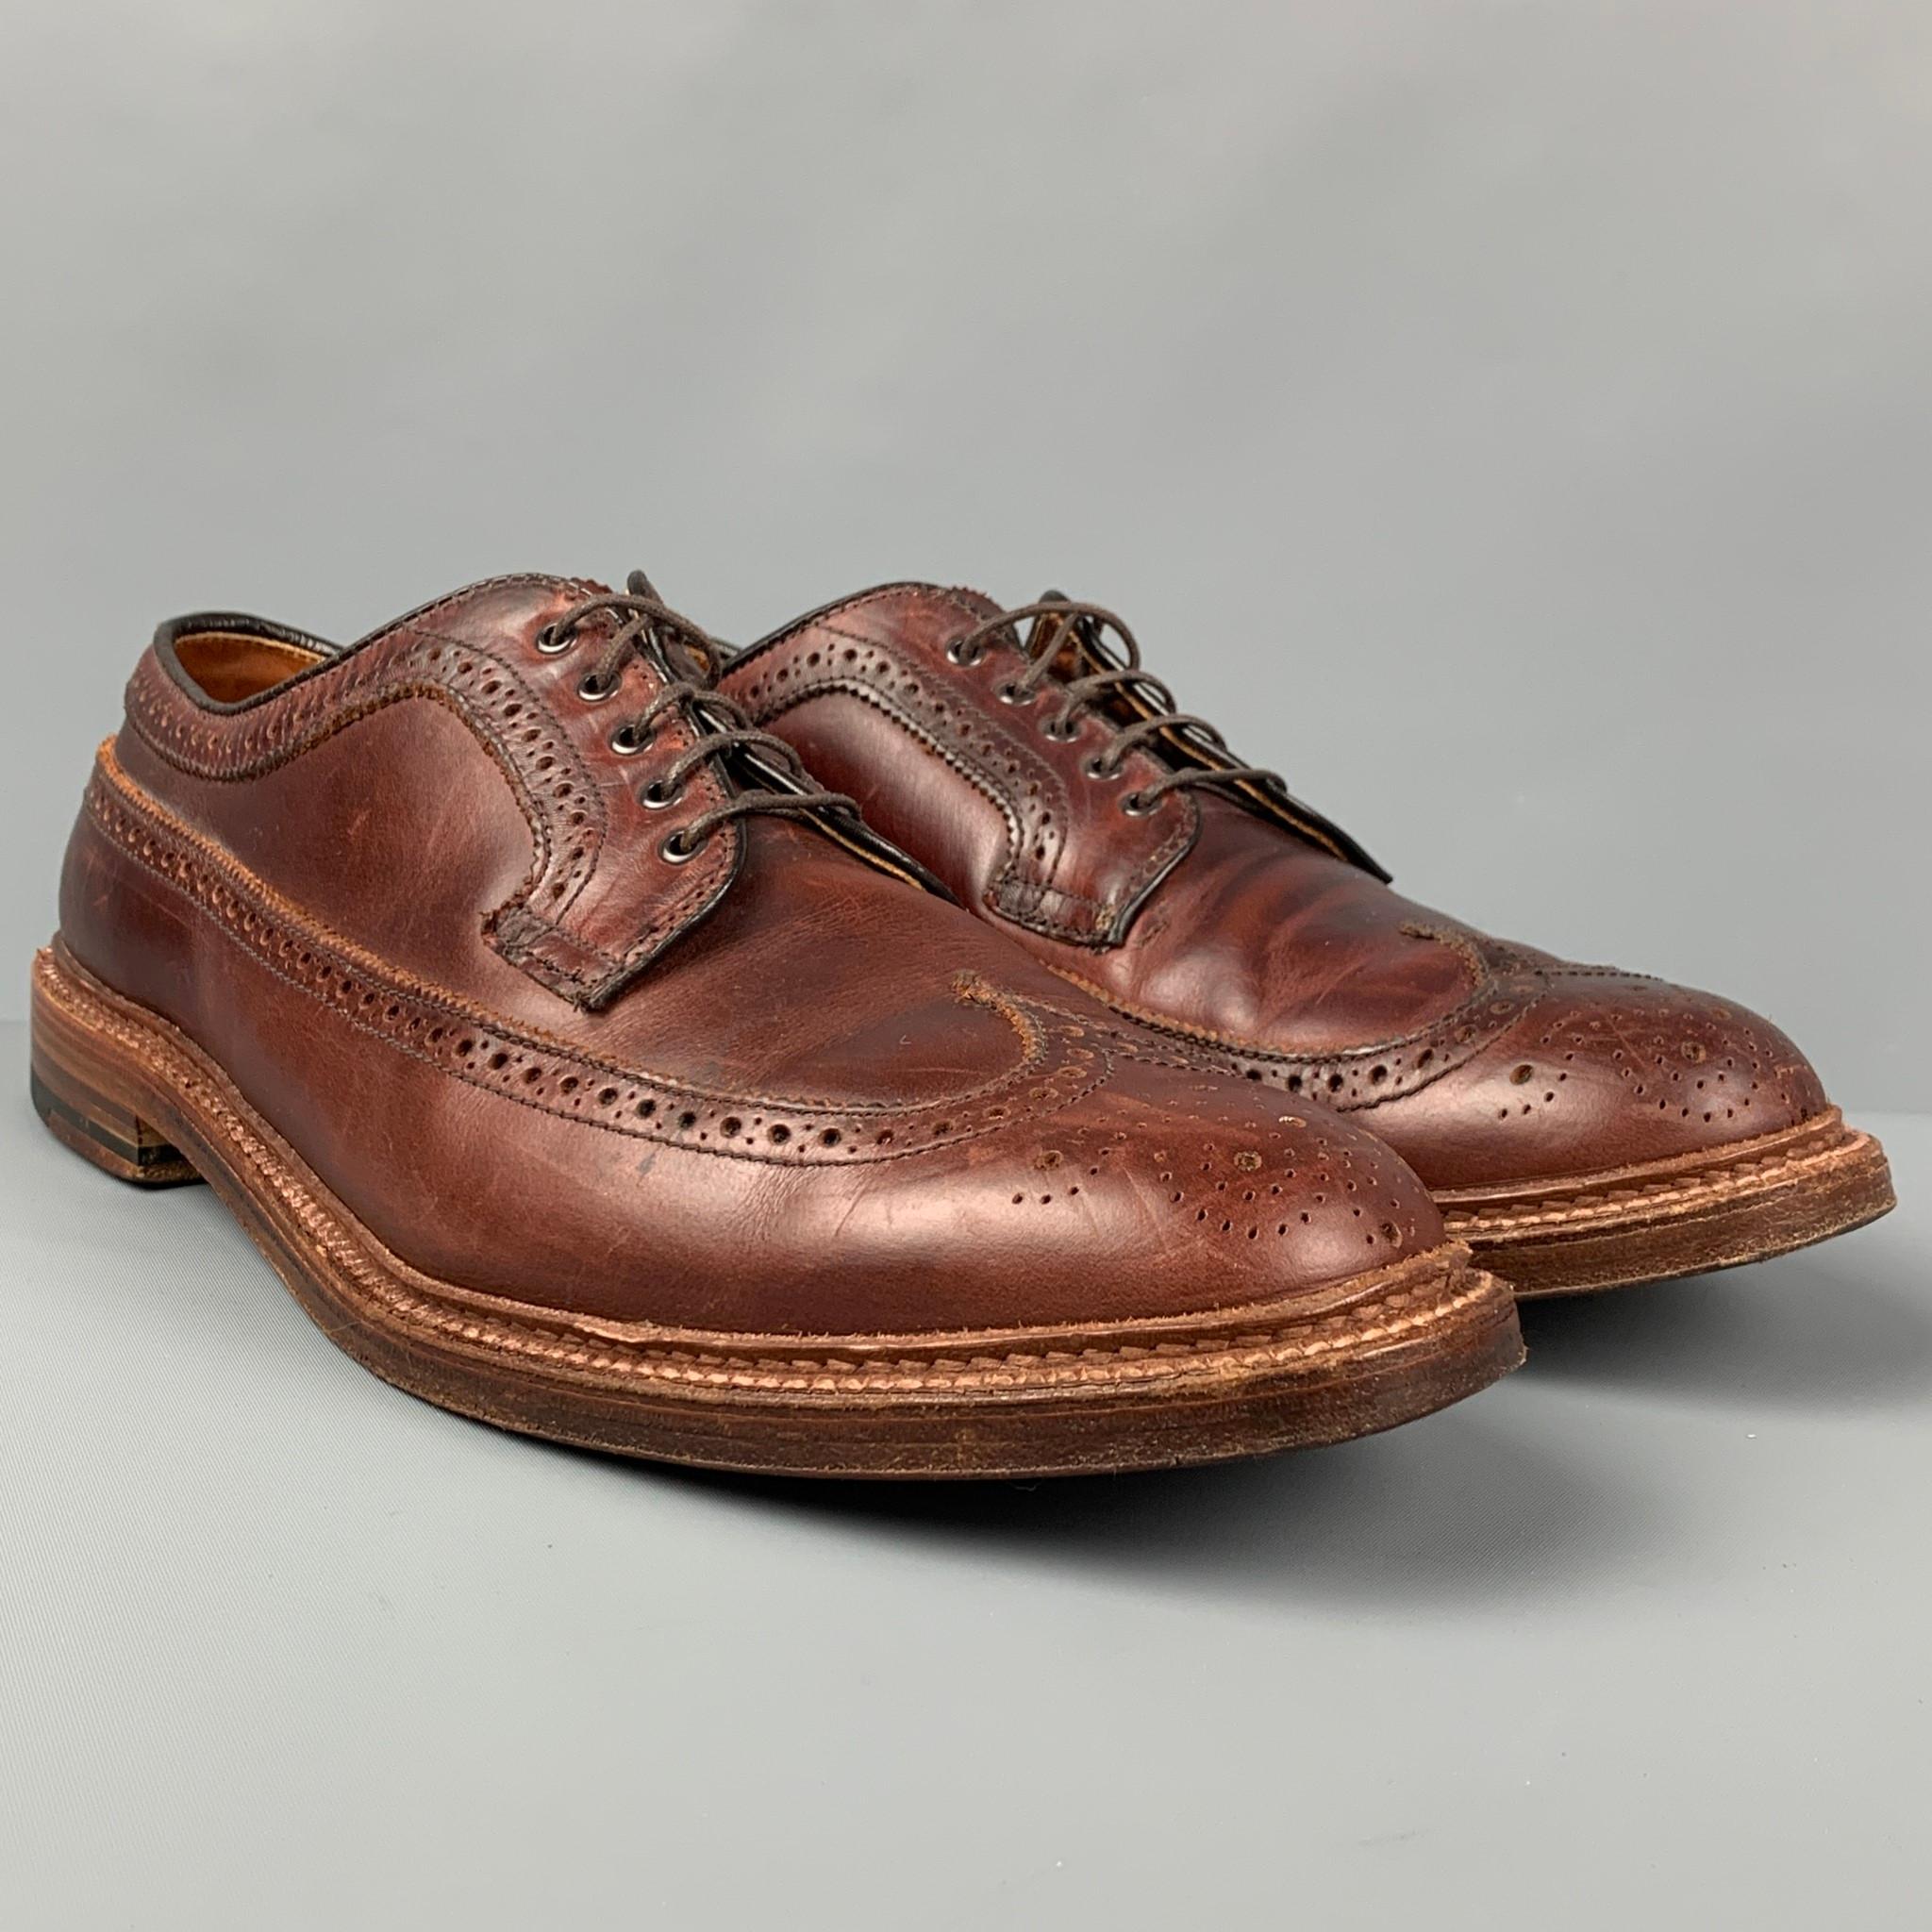 ALDEN shoes comes in a brown leather featuring a wingtip style and a lace up closure. 

Very Good Pre-Owned Condition.
Marked: 11 B/D

Outsole: 13 in. x 4.5 in. 